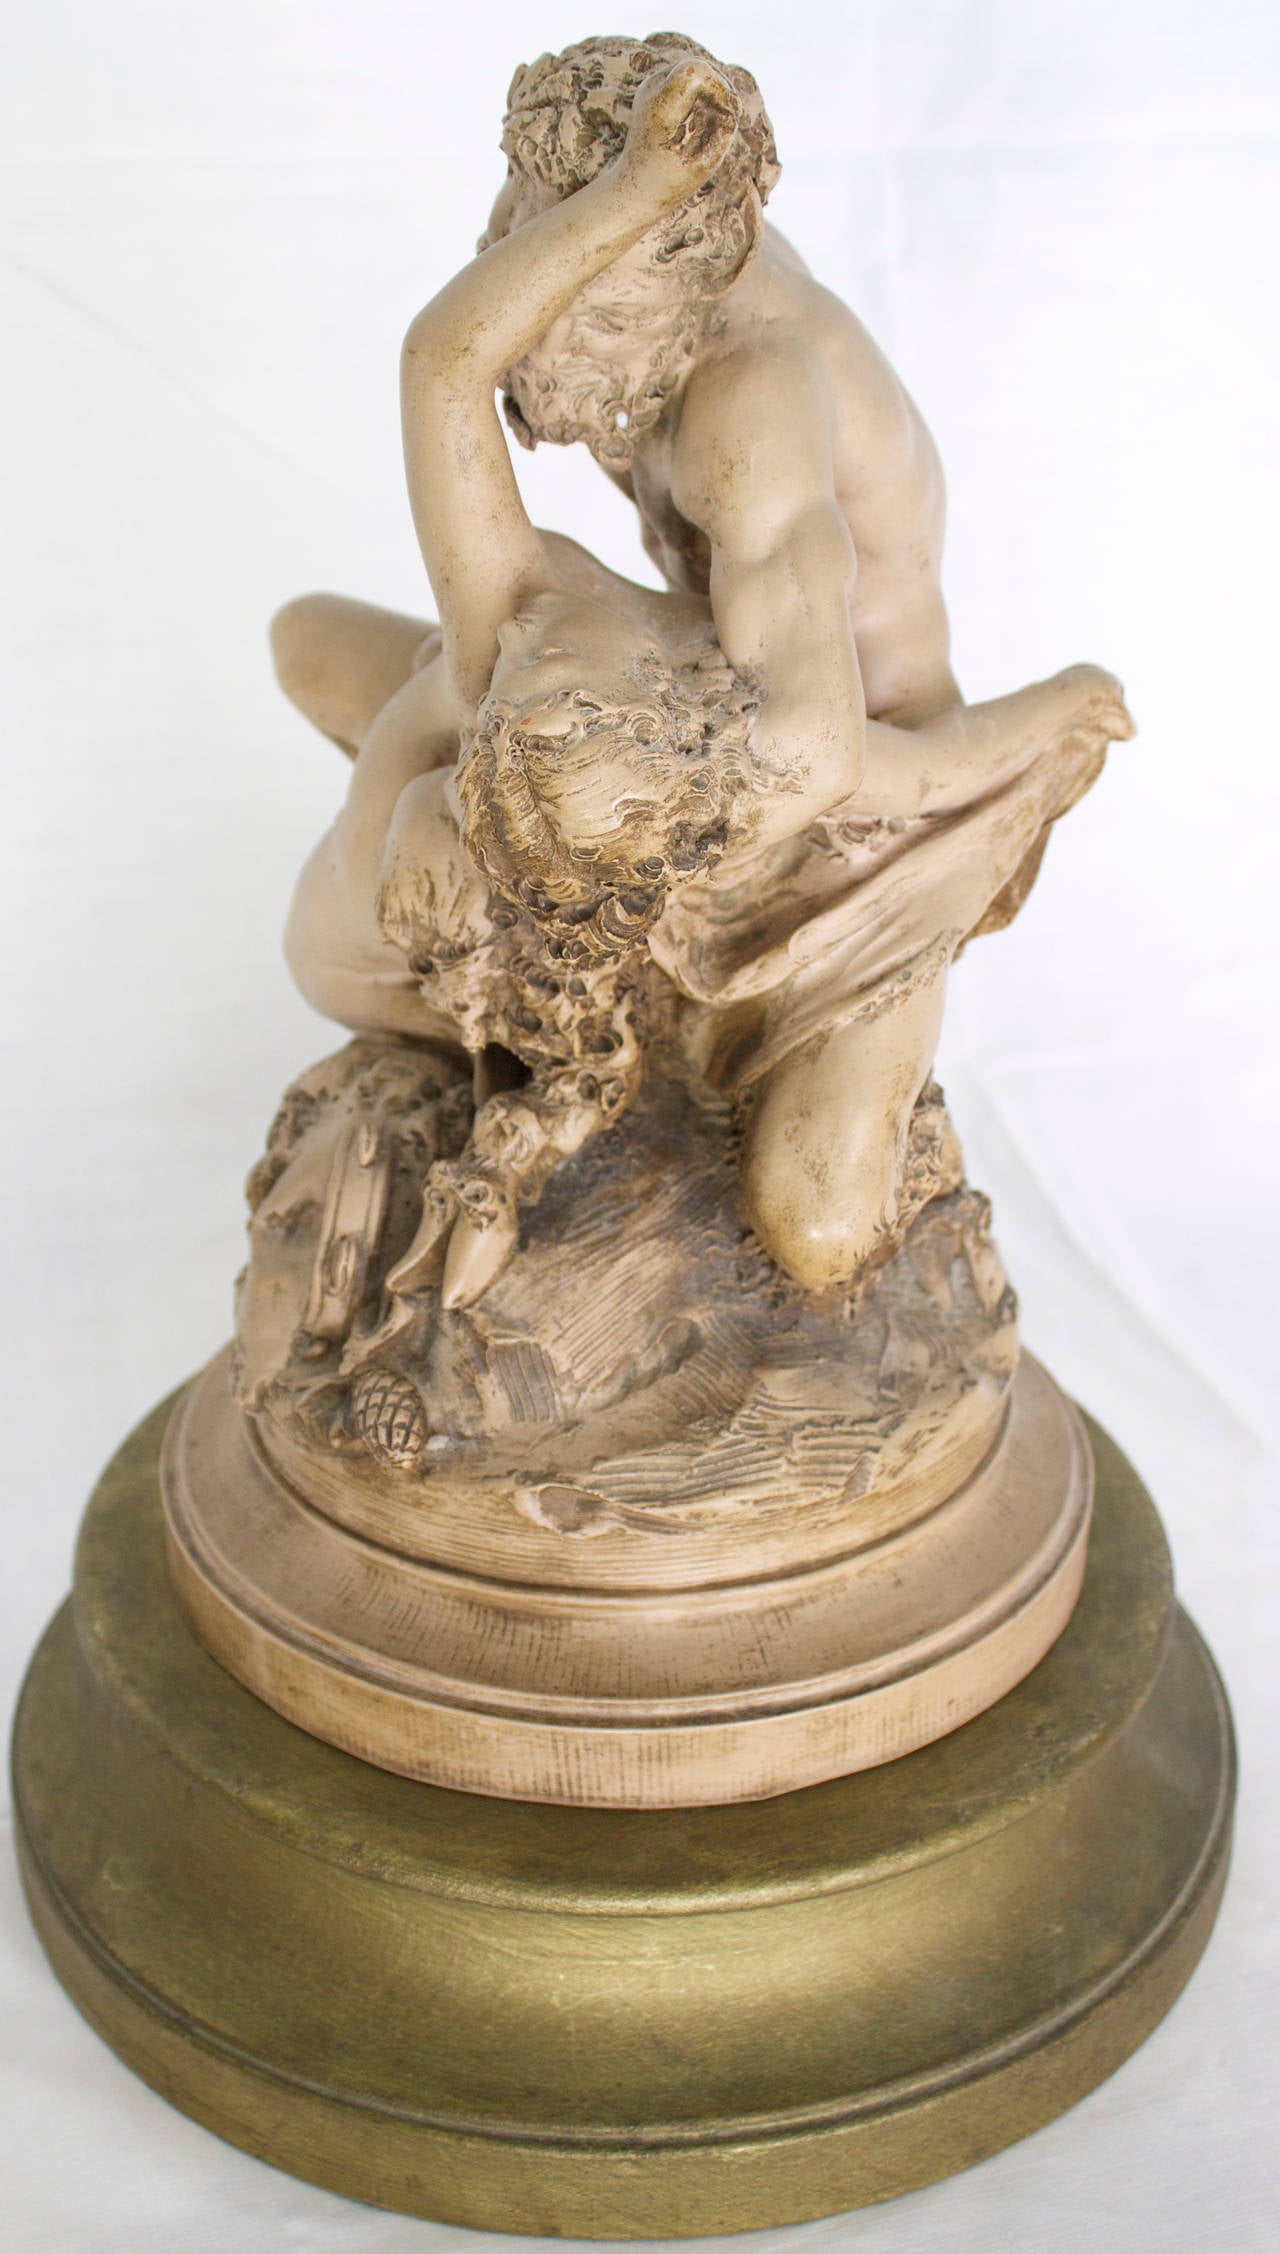 Terracotta group representing a Satyr detaining a resisting Bacchante. It rest on a cylindrical base surmounted by a rock on which there is tambourine, thyrsus and wine Amphora. Signed Carrier- Belleuse. The sculpture is on a gilded wood